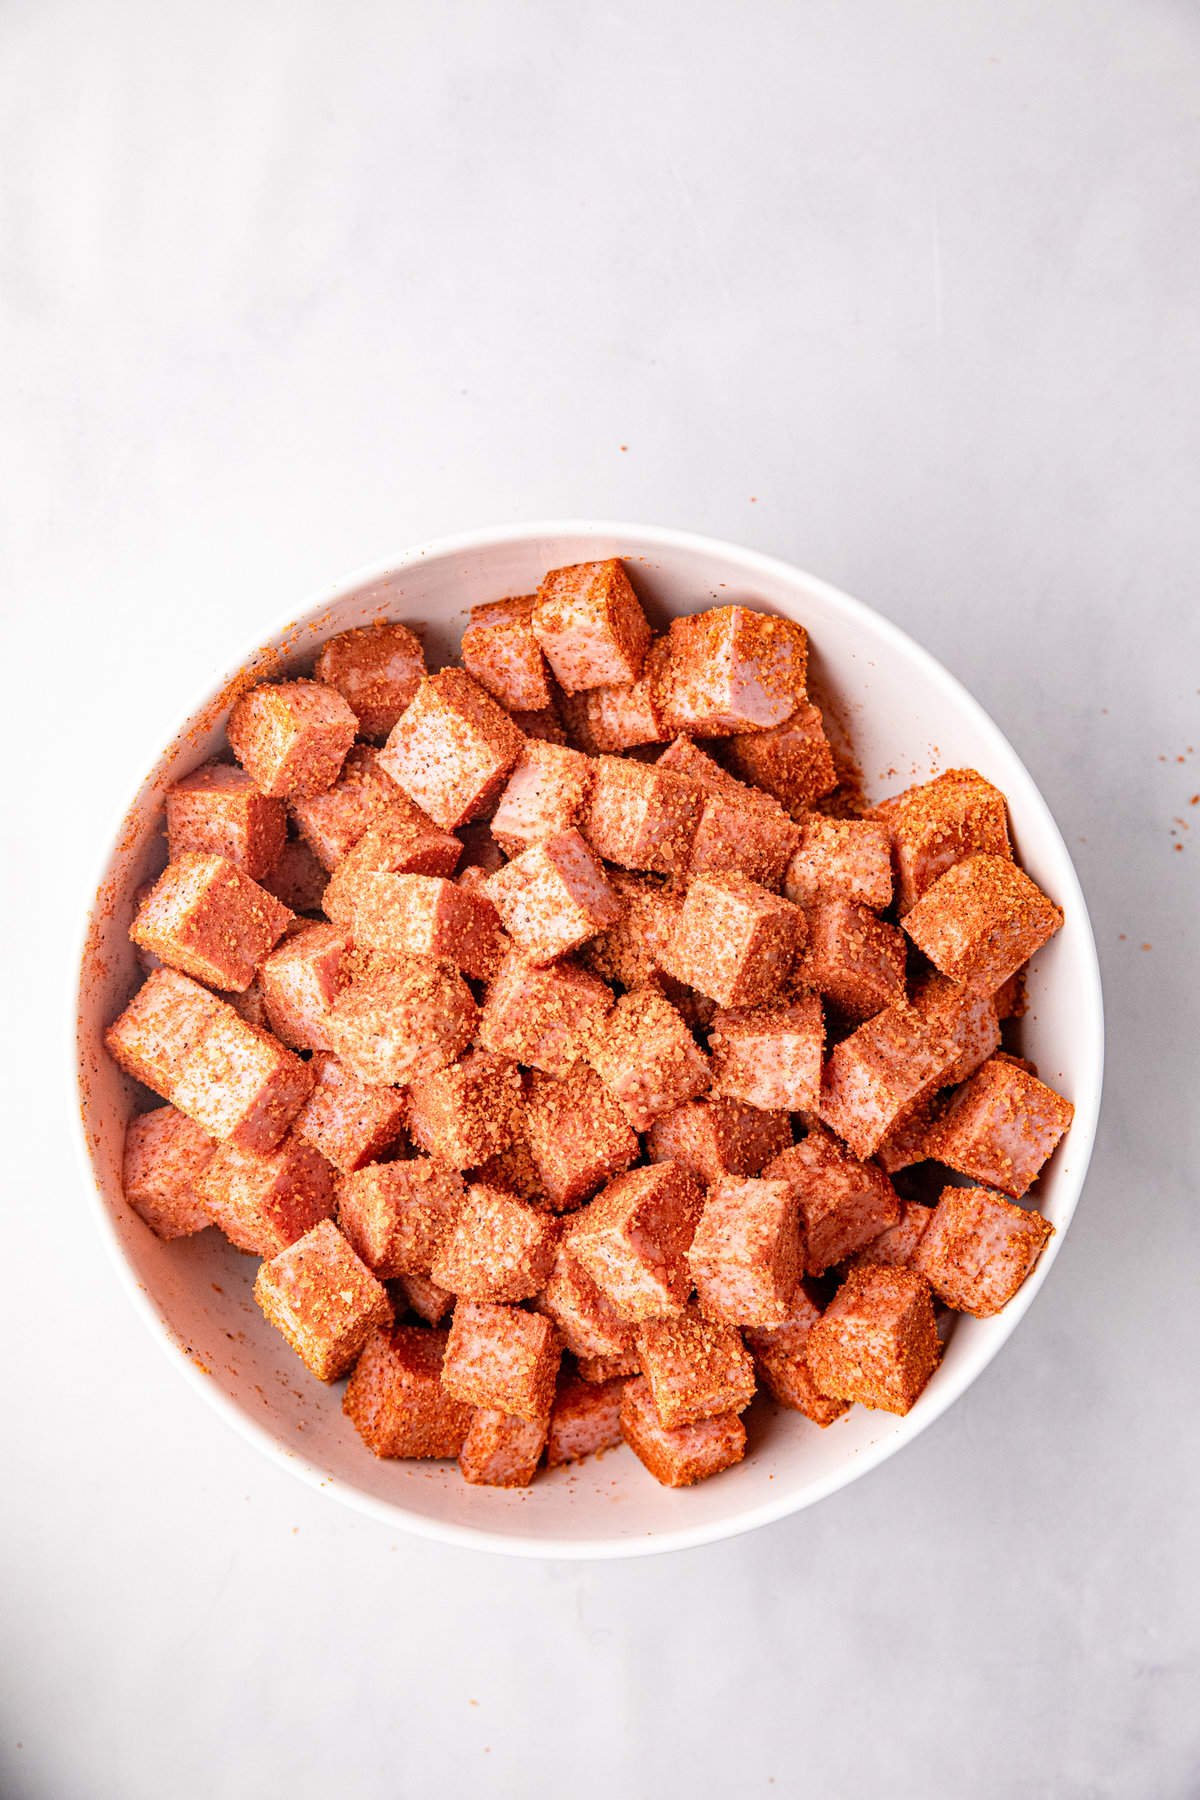 Generously coated Spam pieces with Sweet & Smoky seasoning in bowl